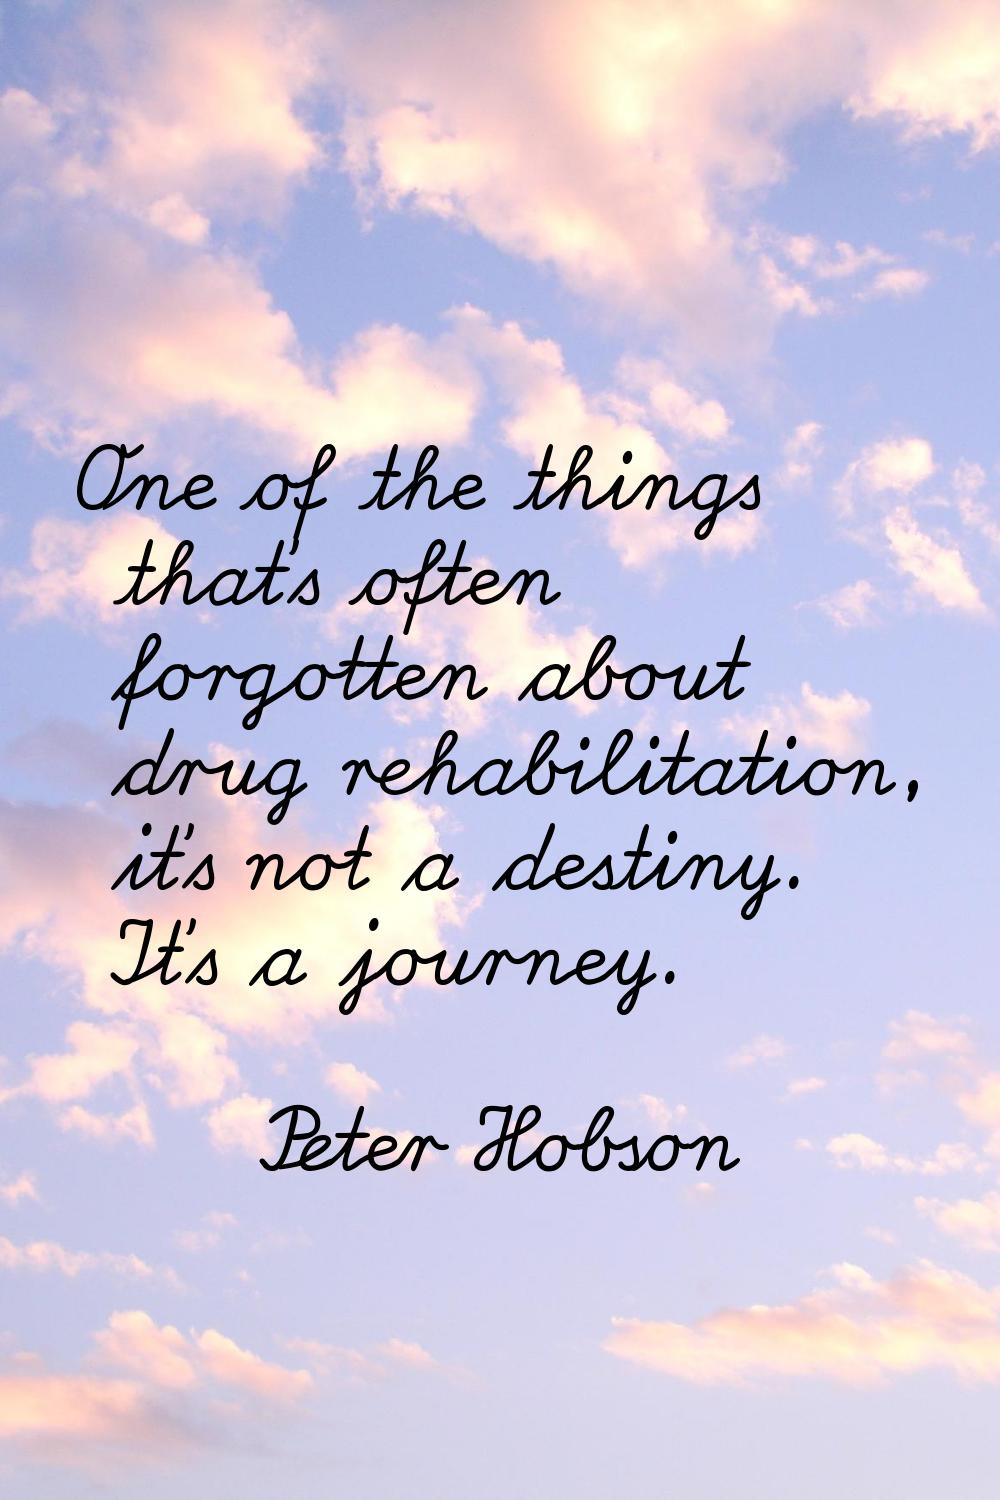 One of the things that's often forgotten about drug rehabilitation, it's not a destiny. It's a jour